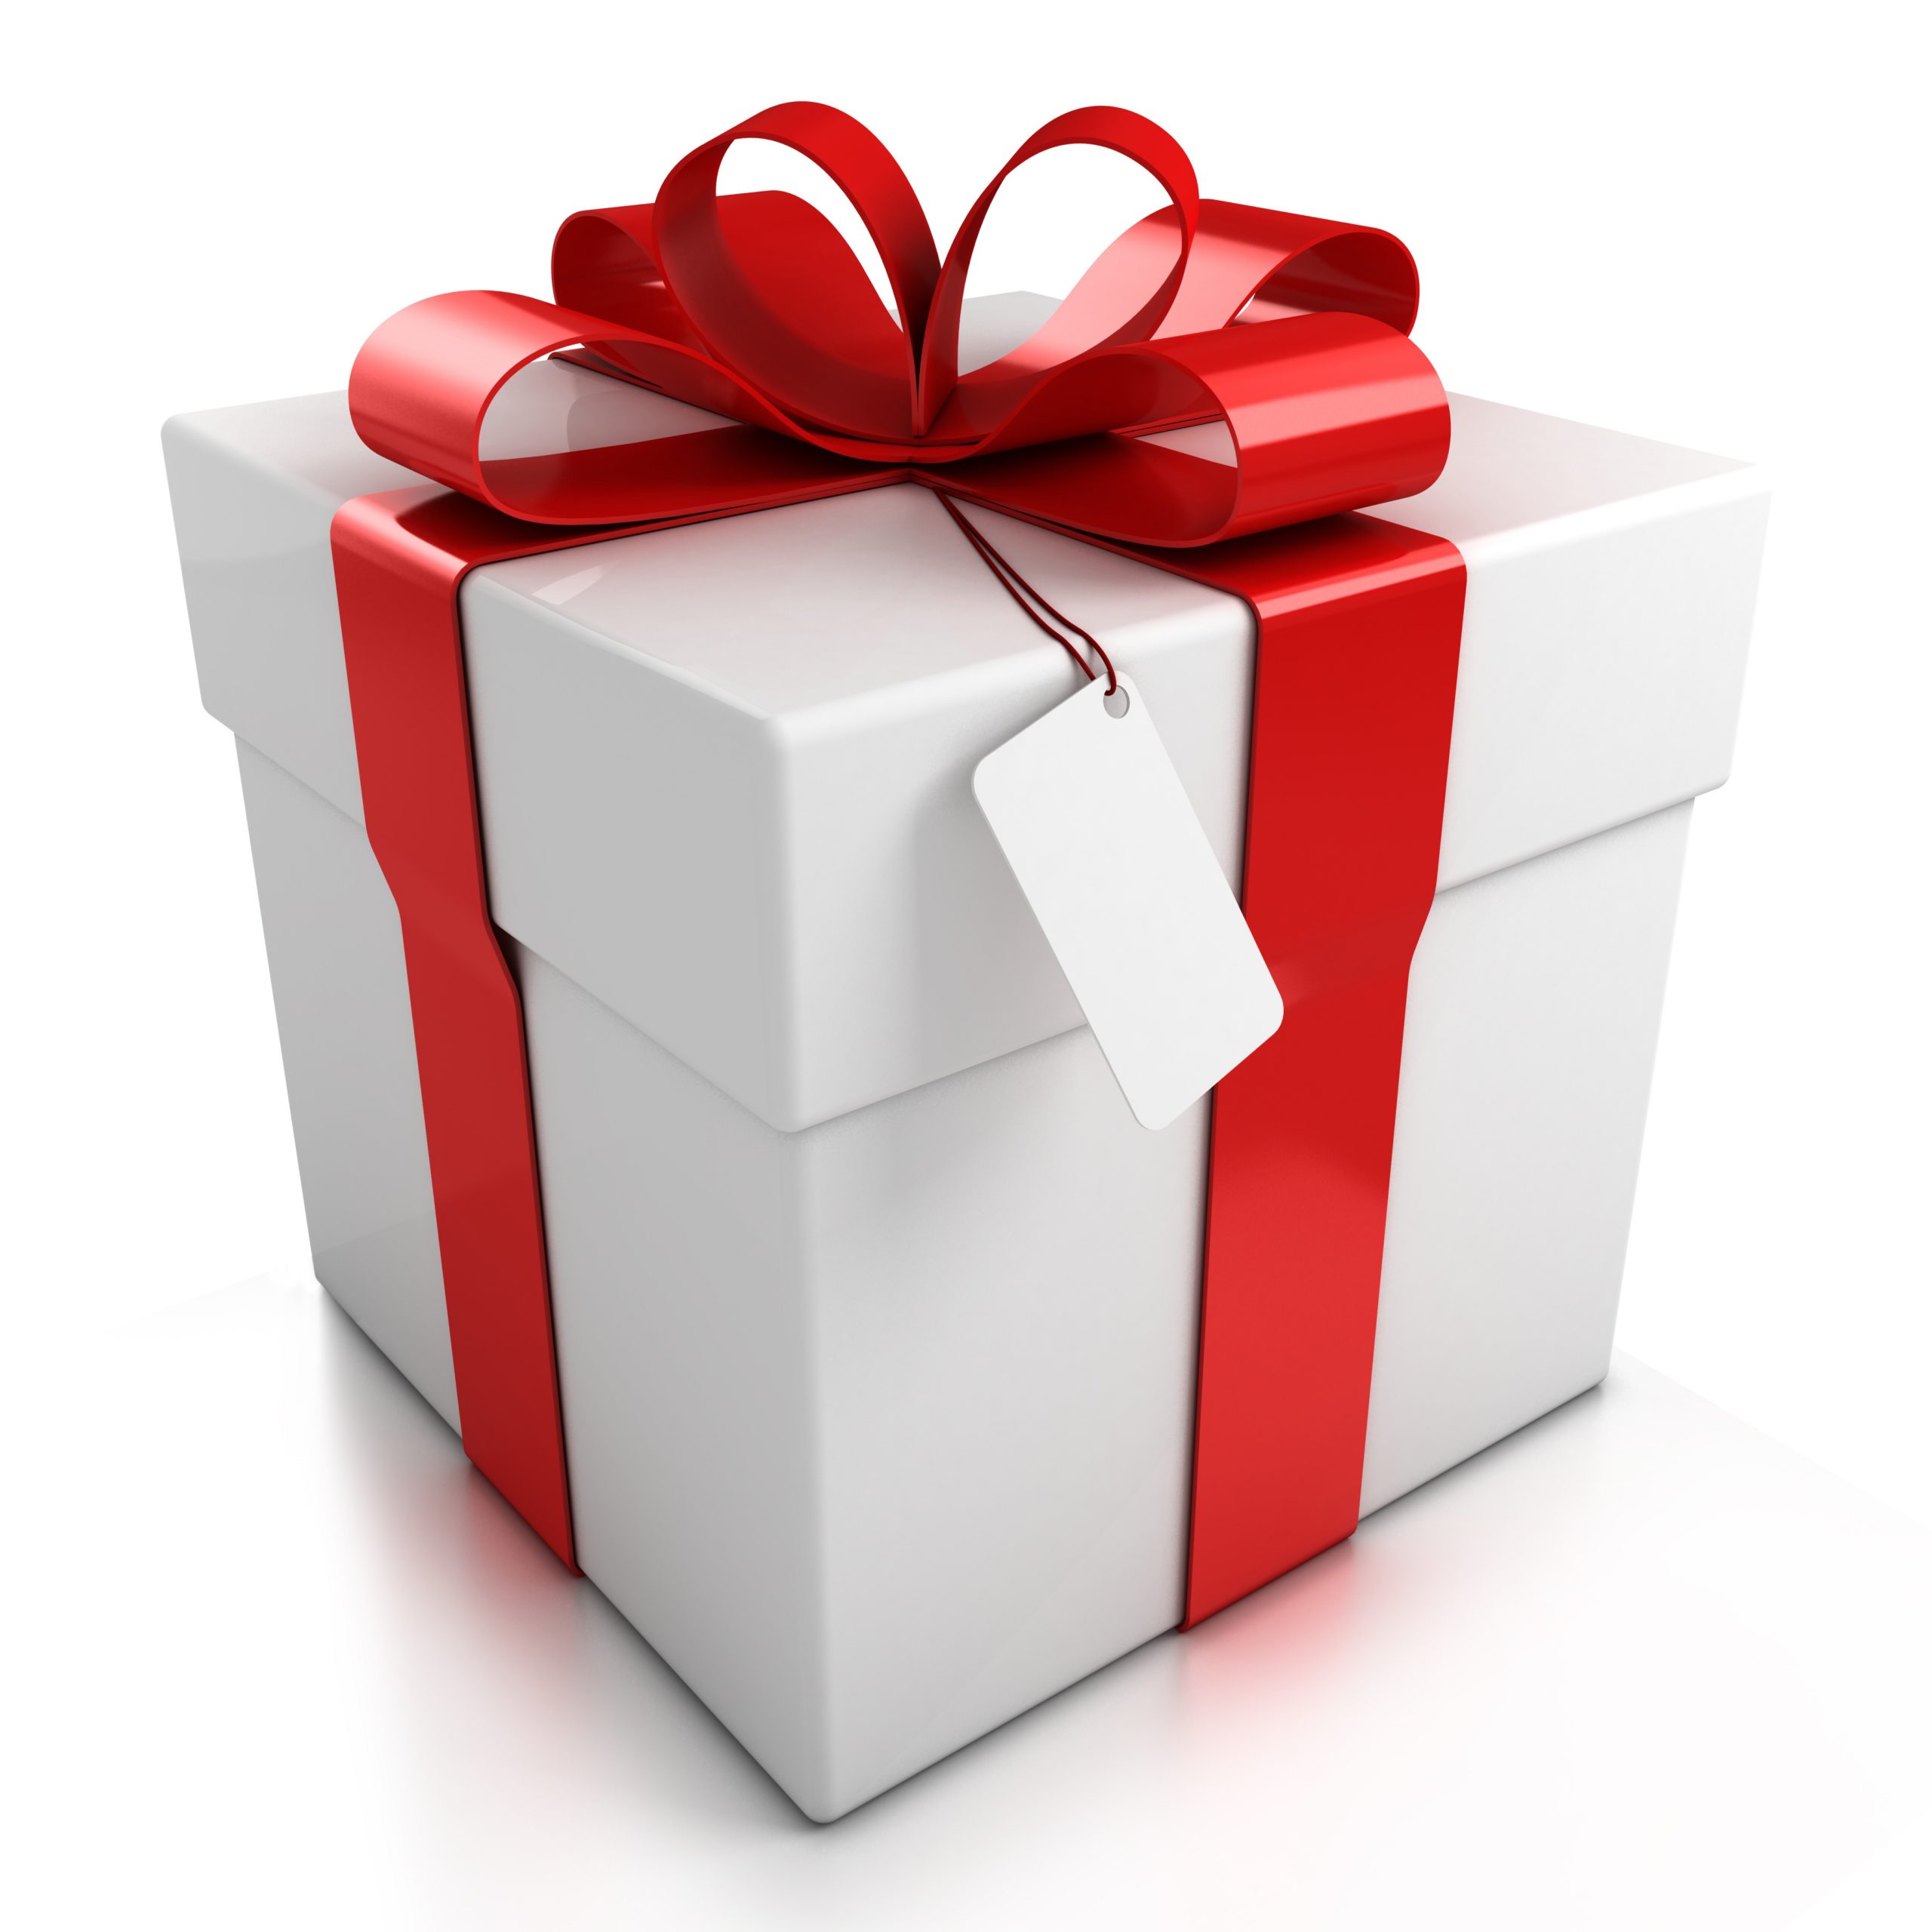 Image of a gift wrapped with red bow.